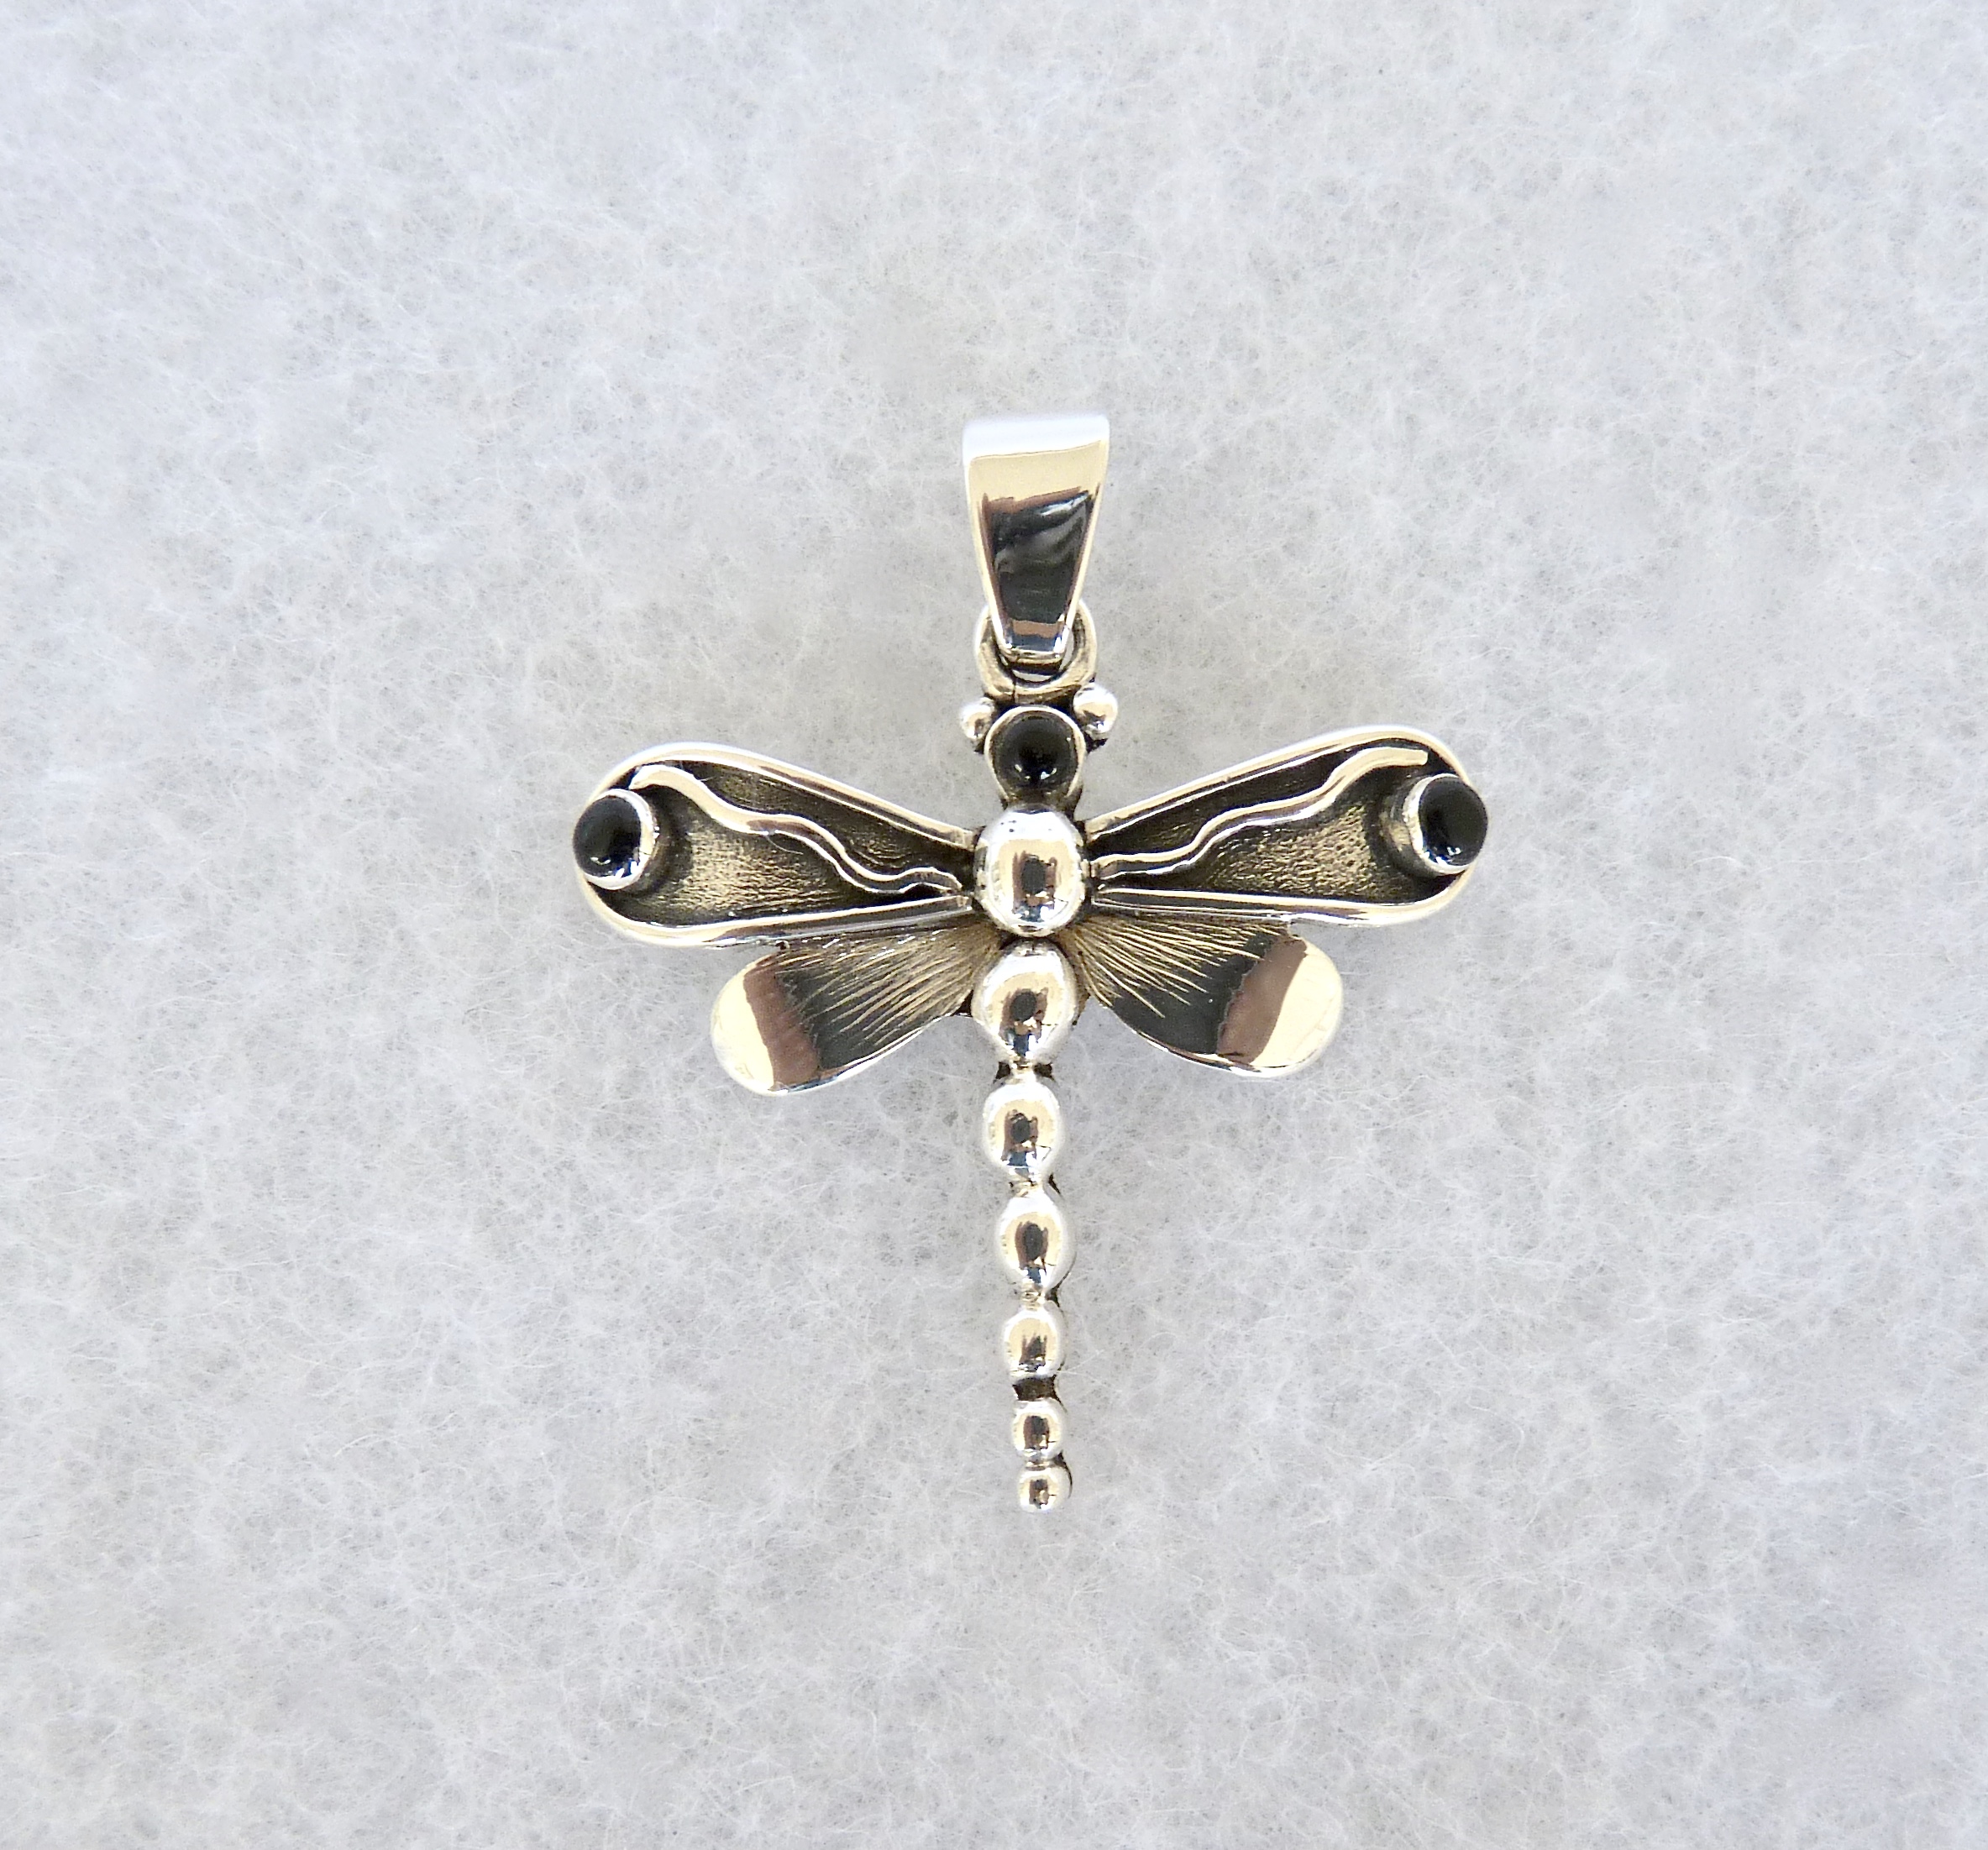 Fly dragonfly fly sterling silver pendant